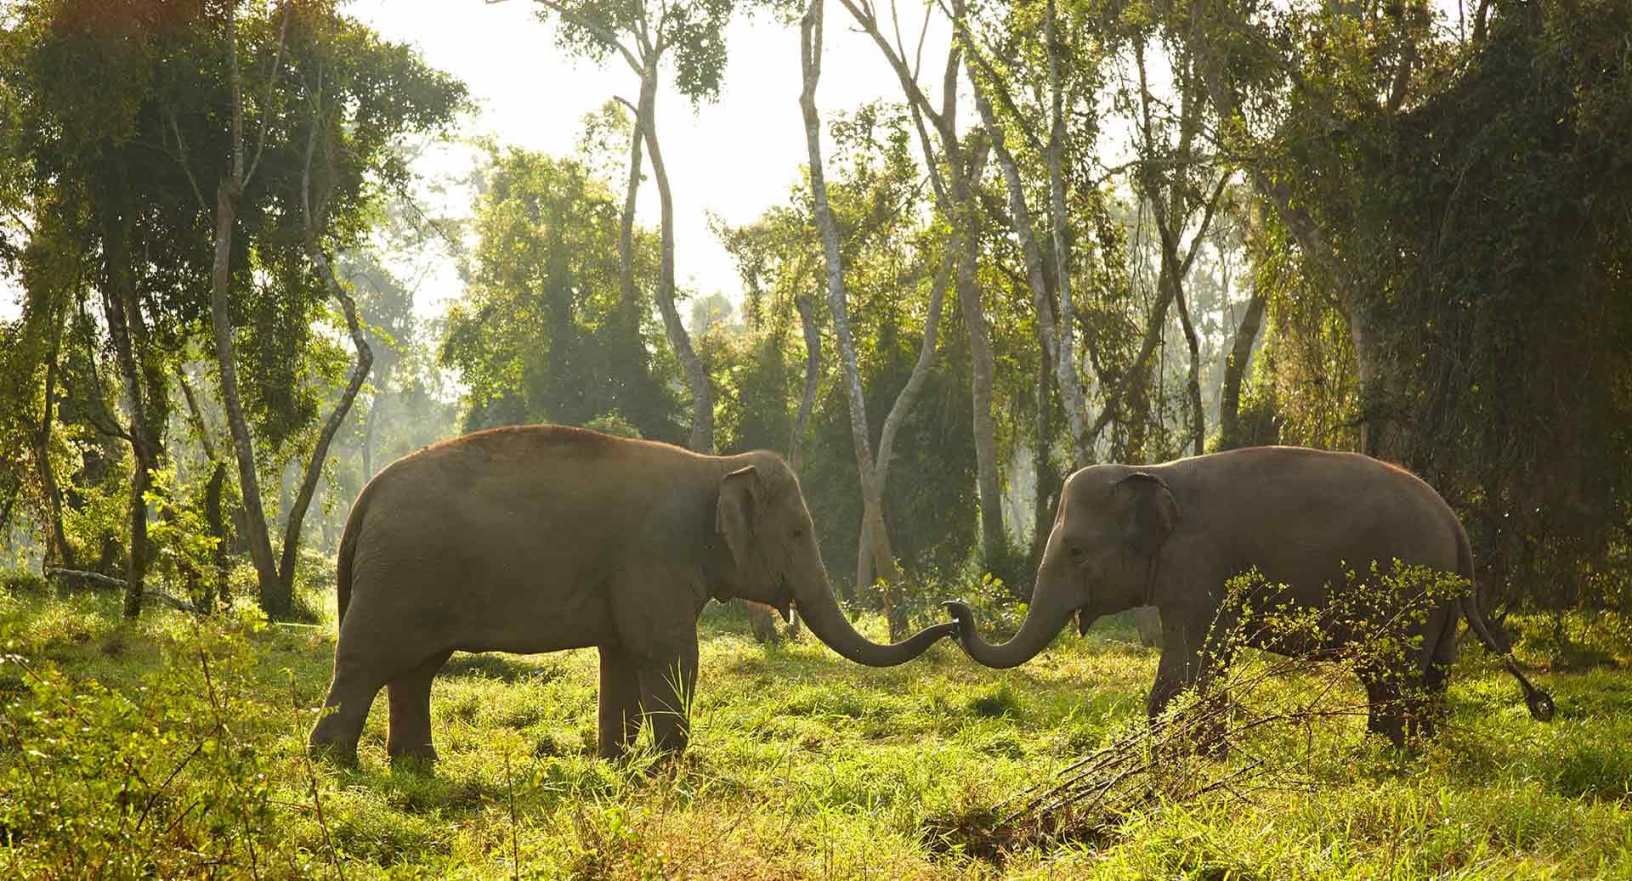 Two elephants in Thai forest near Chiang Mai